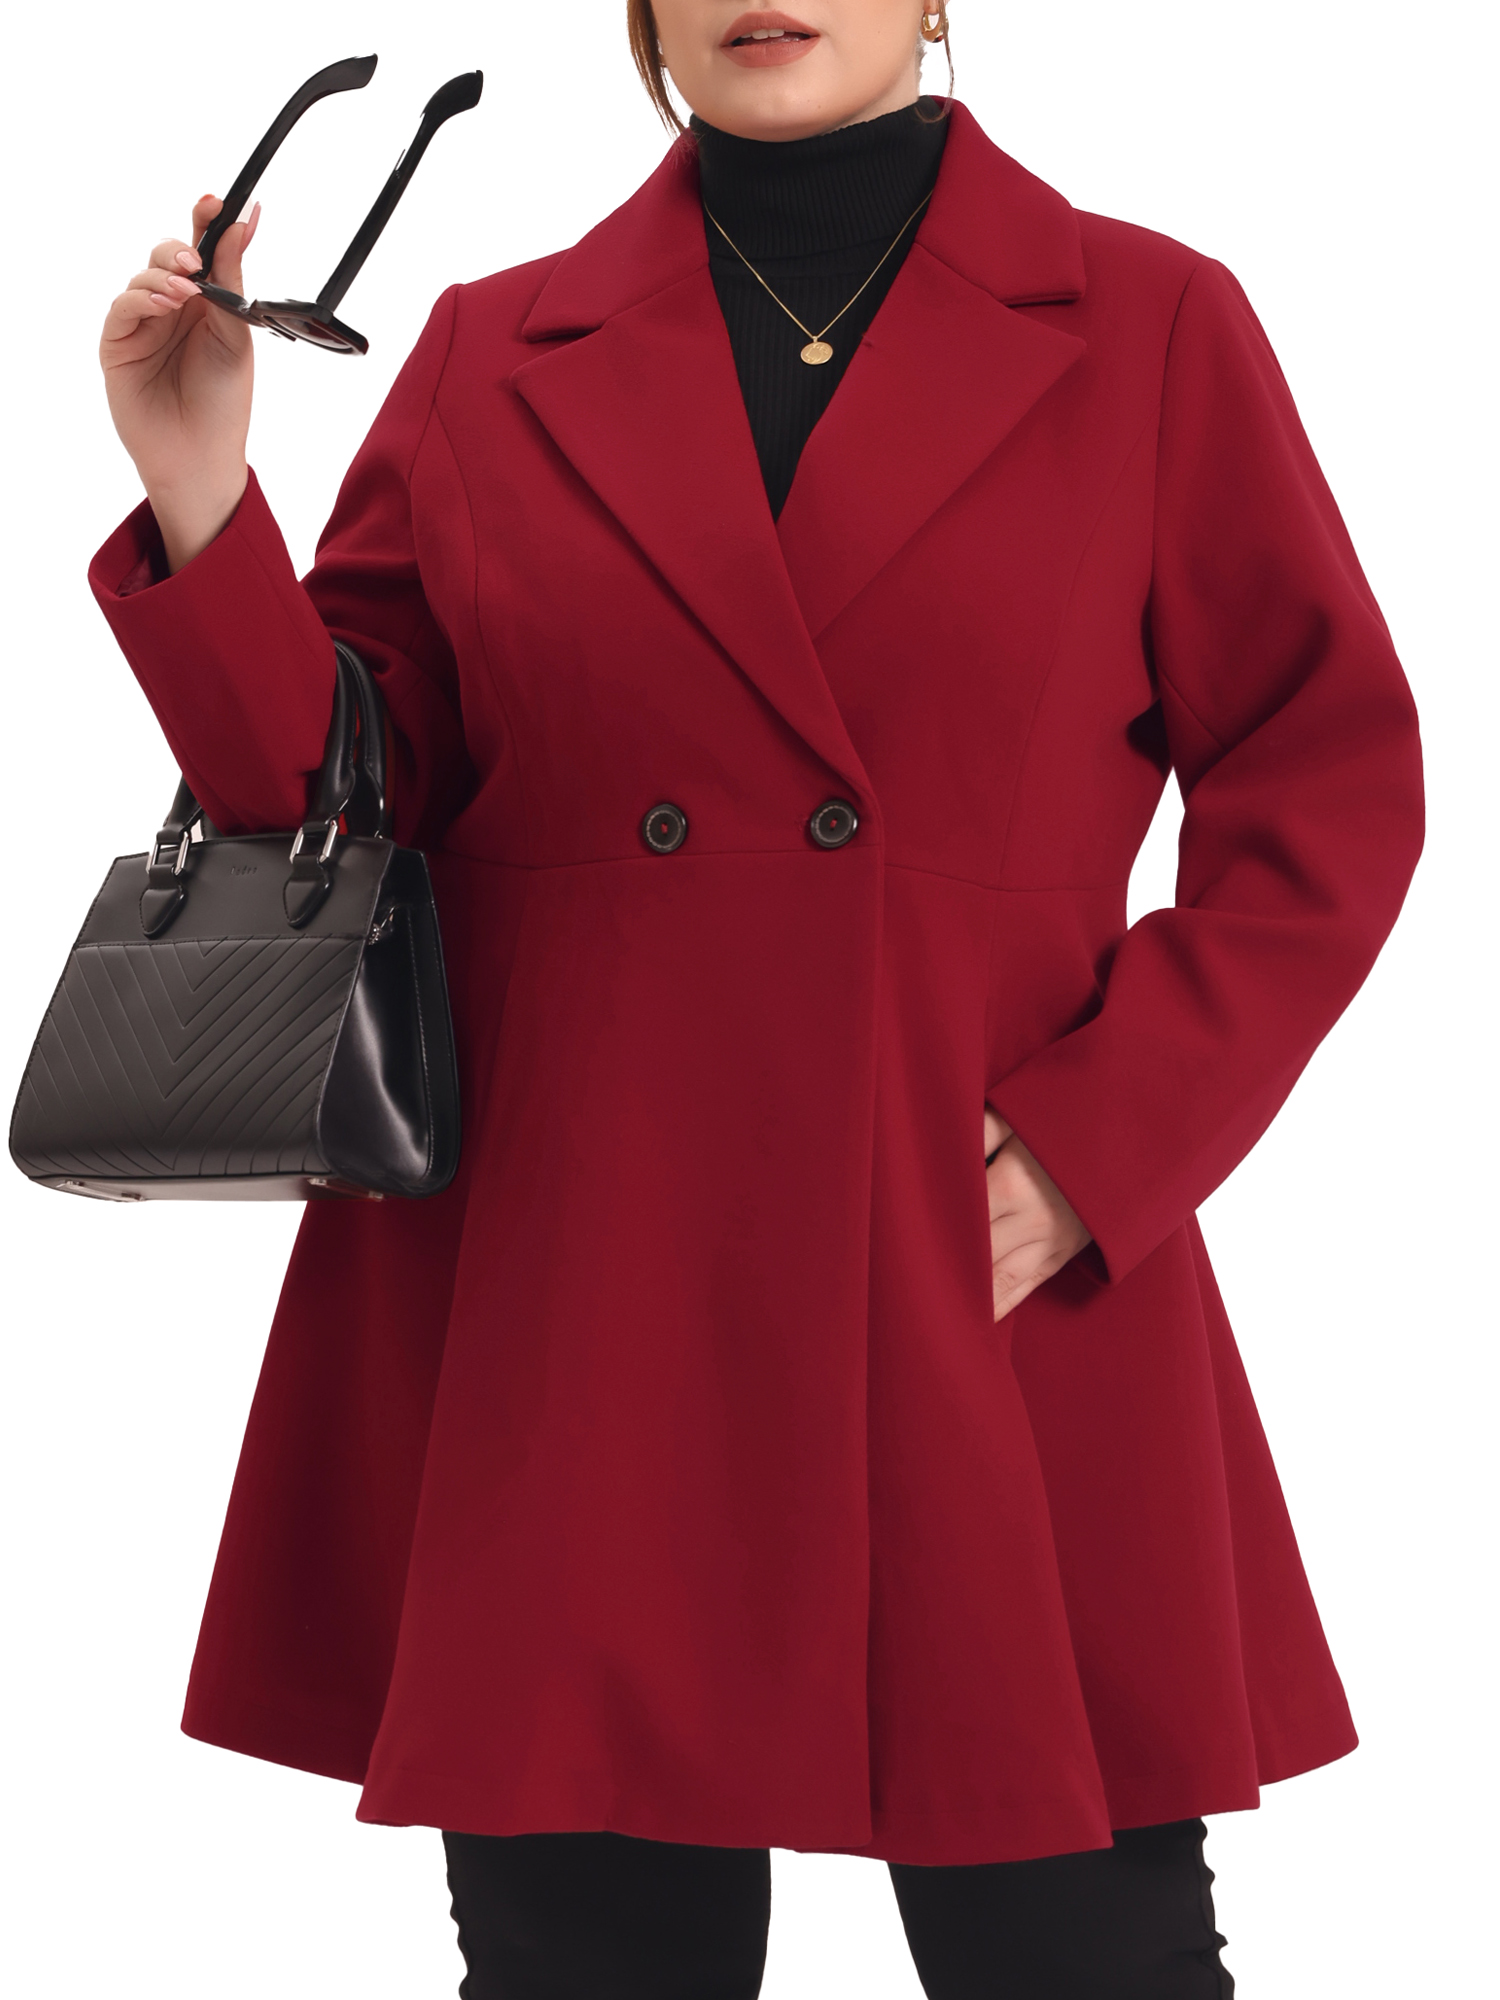 Unique Bargains Plus Size Peacoat for Women Elegant Notched Lapel Double Breasted Long Wool Trench Coat